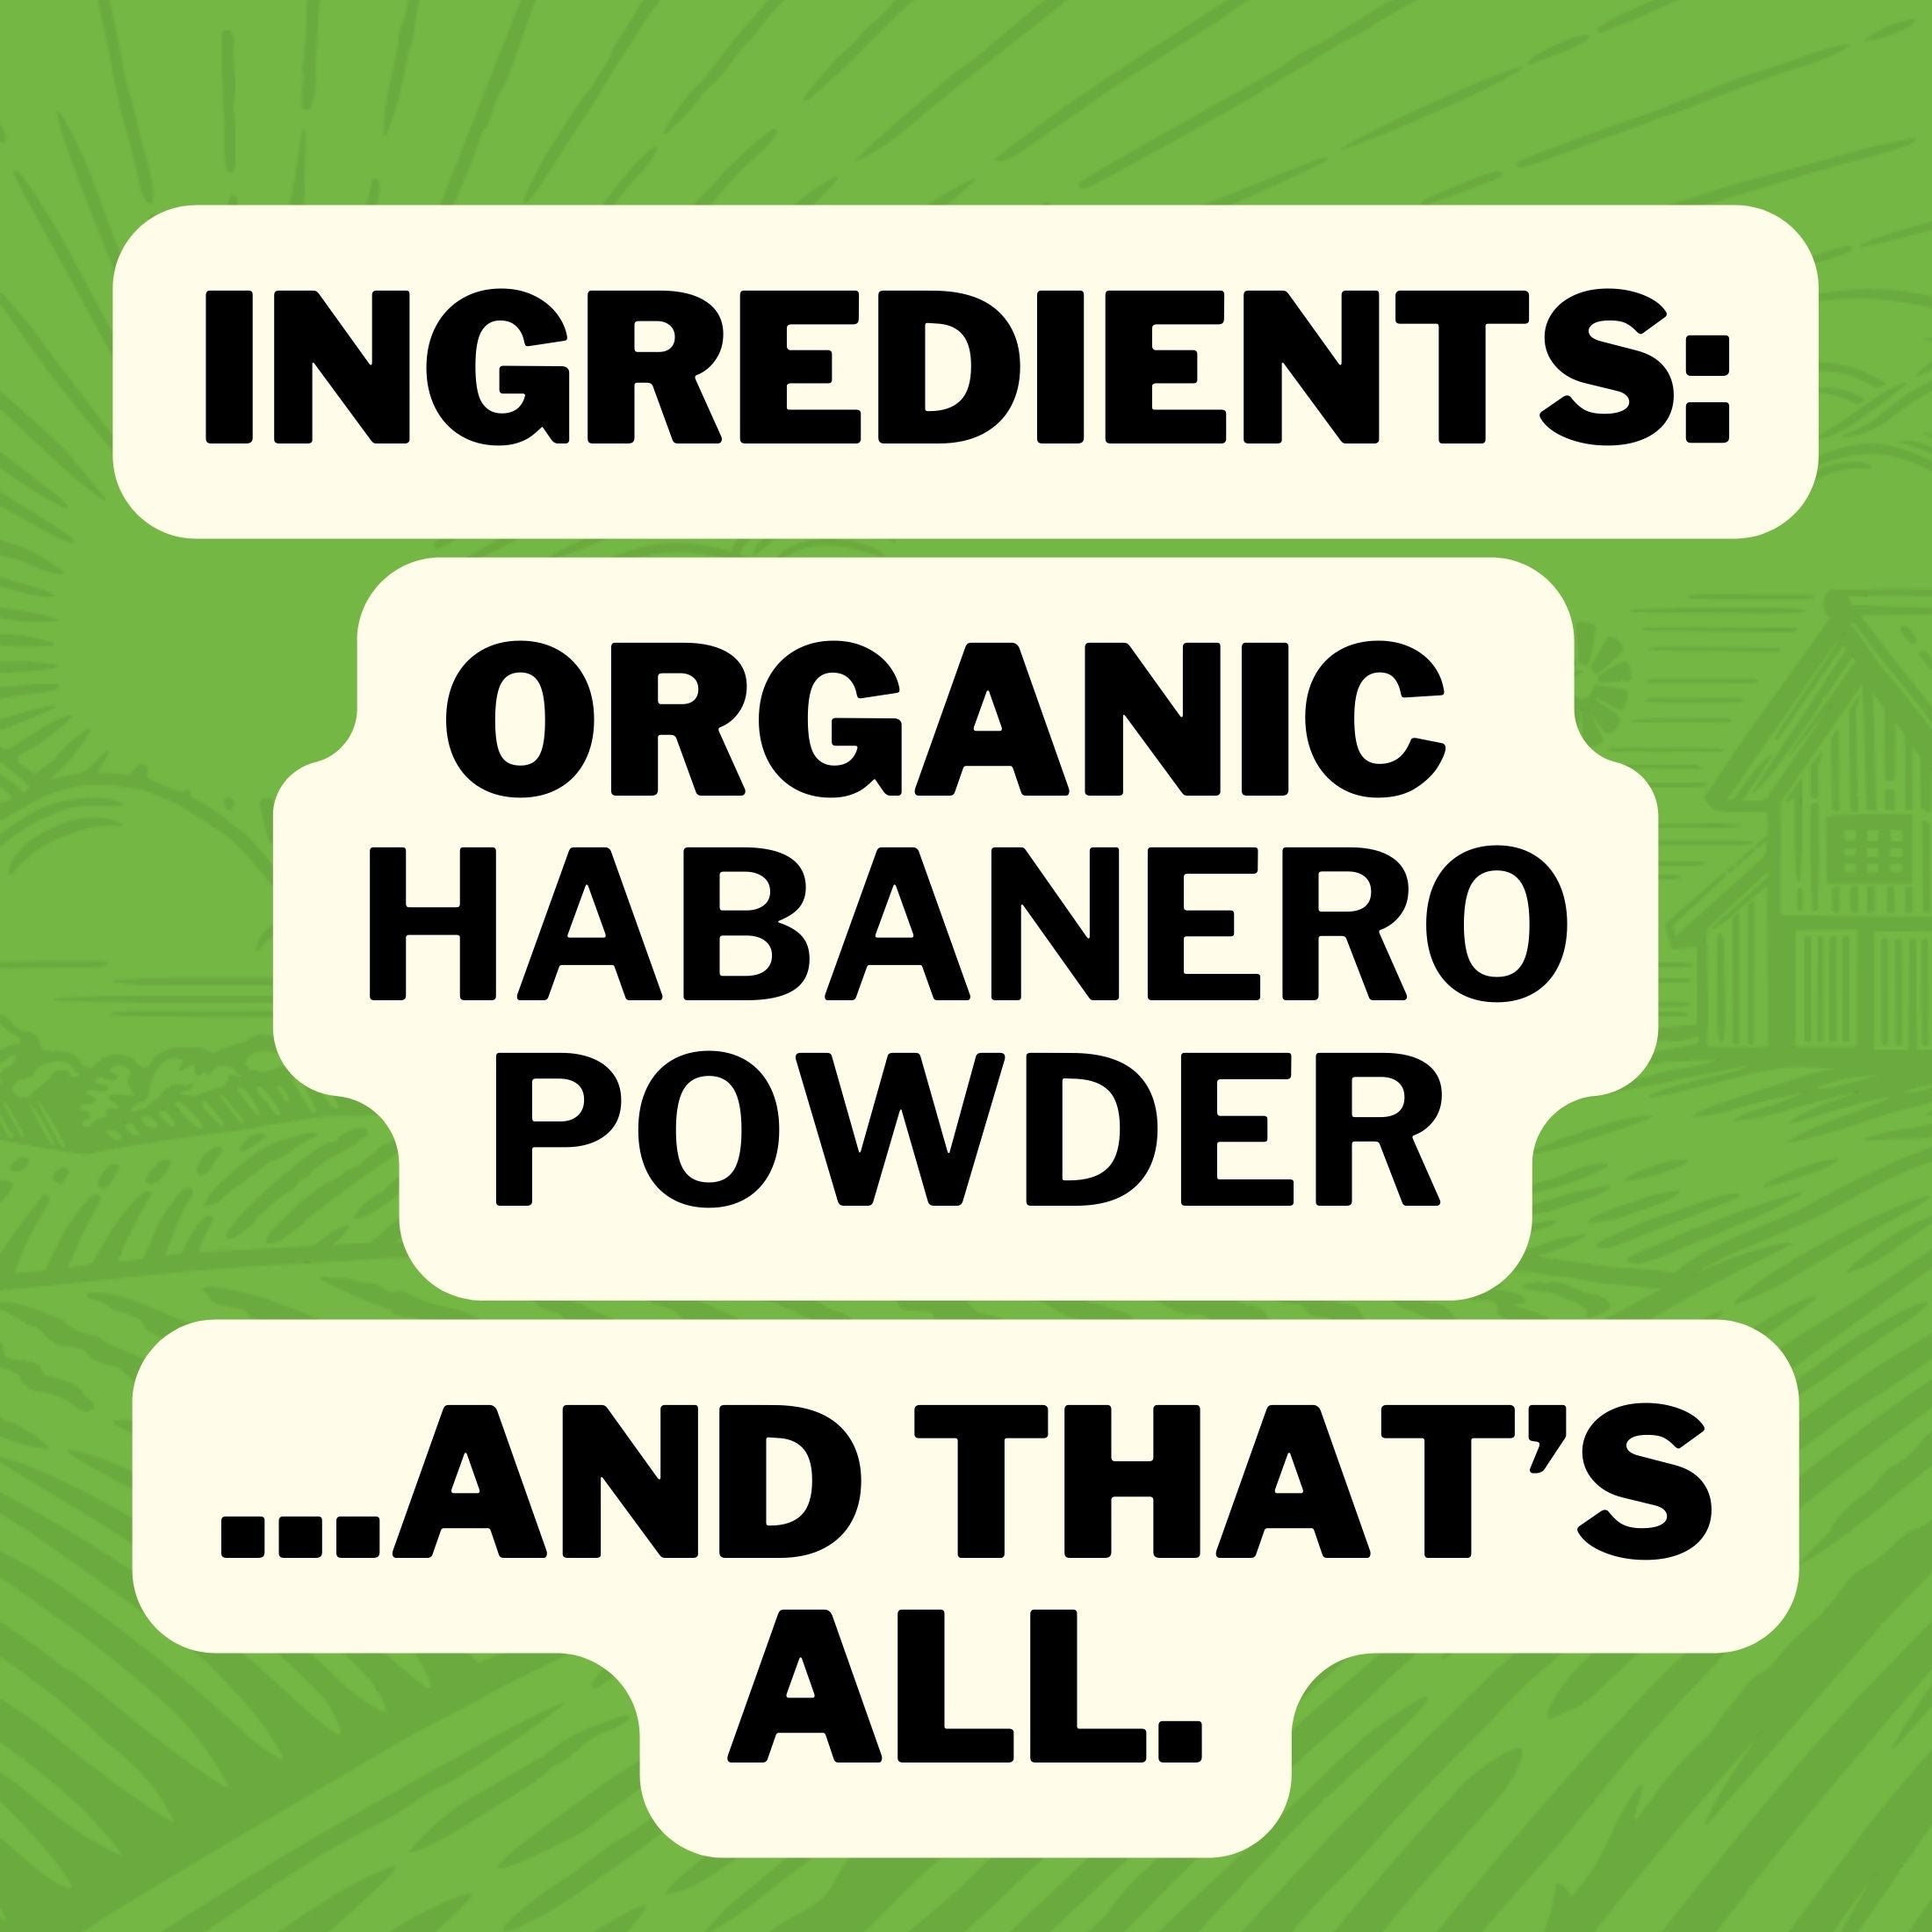 Ingredients : Organic Habanero Pepper Powder ... And That's All.